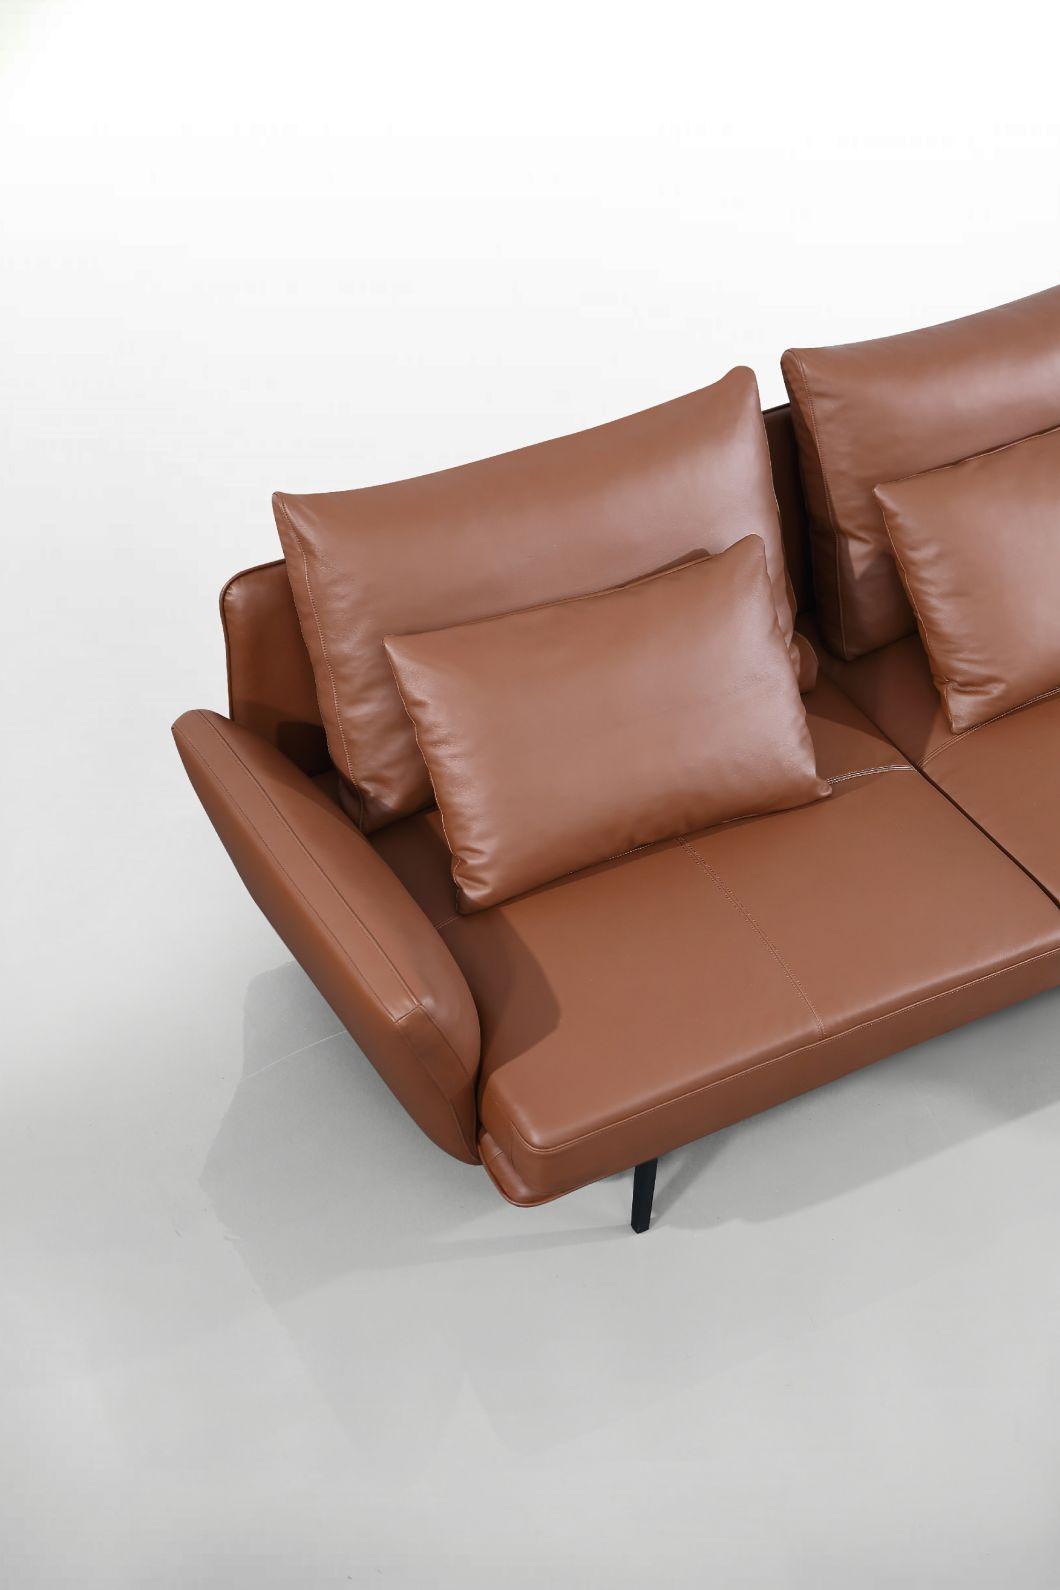 New Modern Home Furniture Multi-Functional Sectional Leather Sofa Set